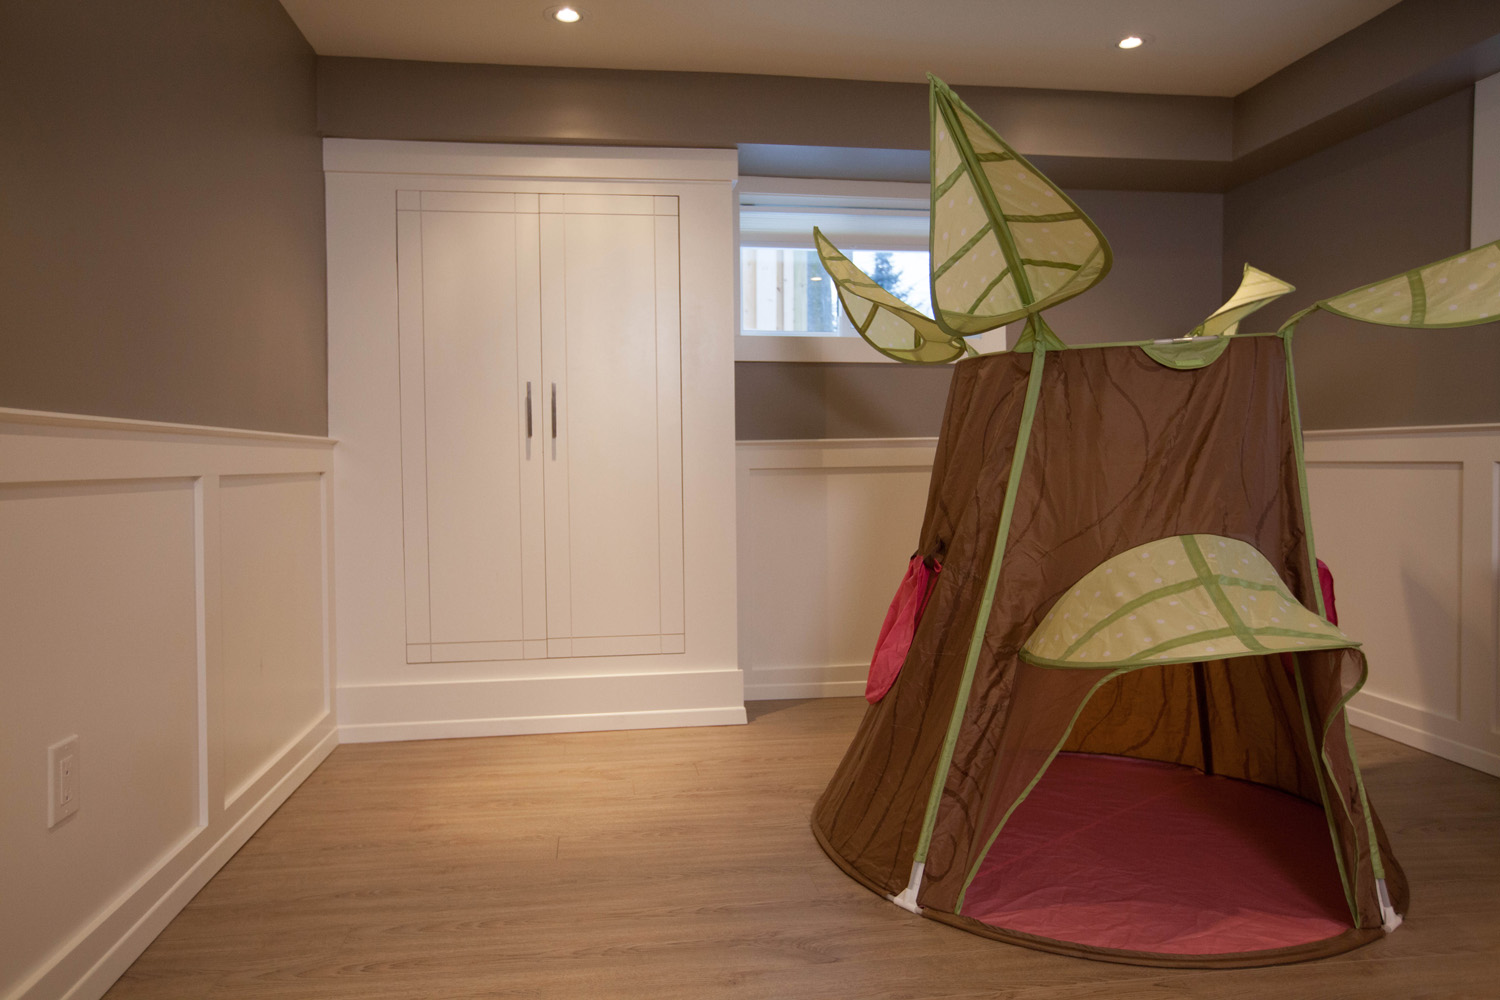 Playhouse for kids in a basement